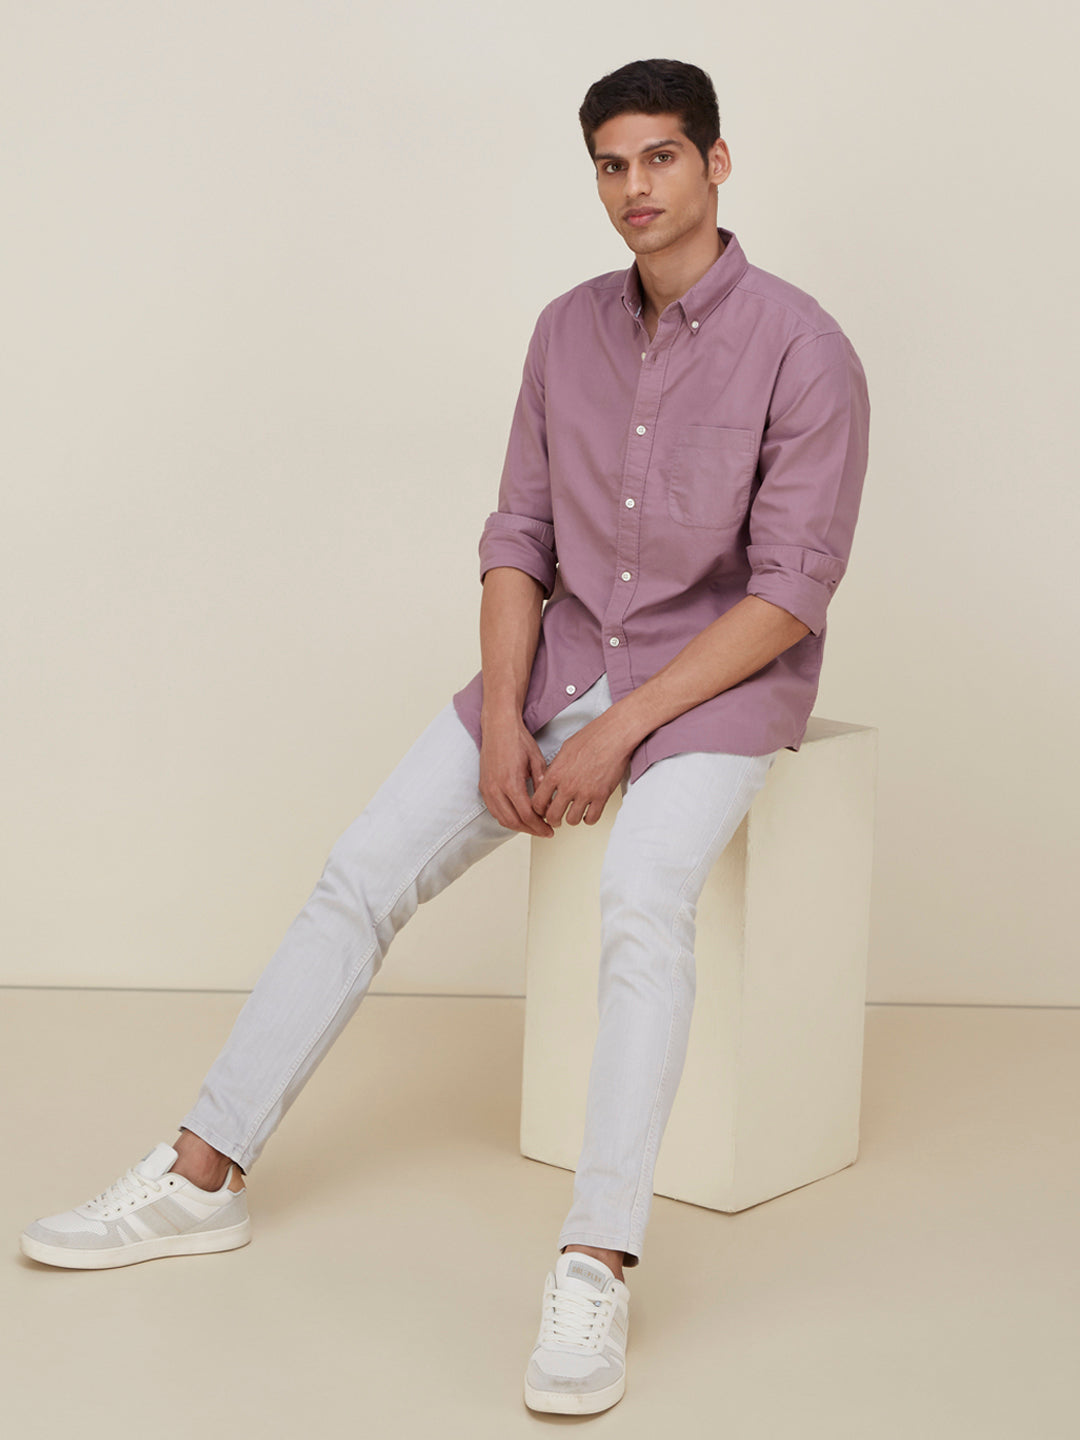 WES Casuals Mauve Relaxed-Fit Shirt | Mauve Relaxed-Fit Shirt for Men Full View - Westside